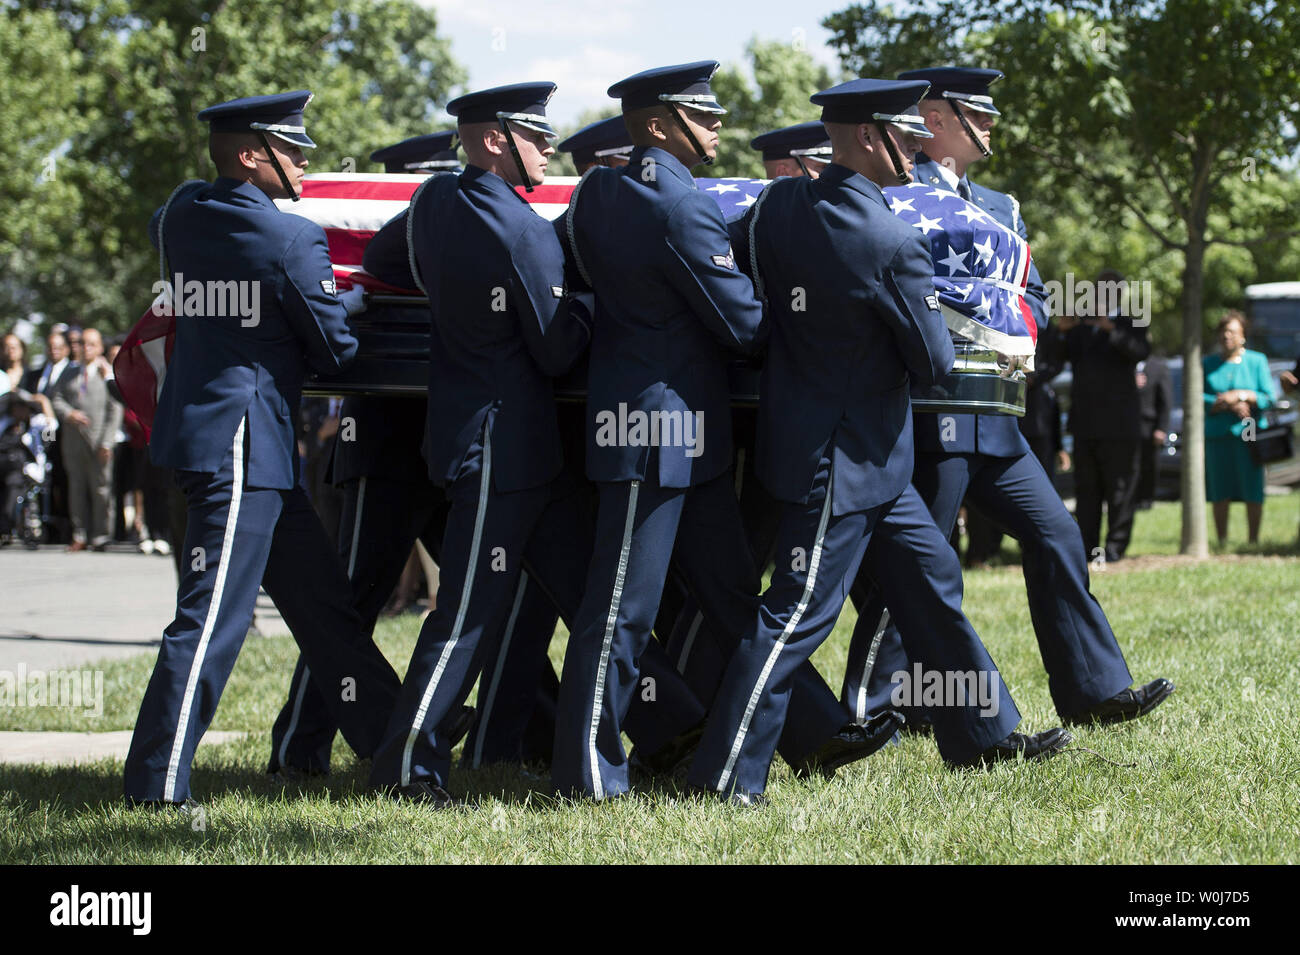 An Air Force Honor Guard casket team carries the casket containing the remains of U.S. Air Force 2nd Lt., Malvin Greston 'Mal' Whitfield during his funeral at Arlington National Cemetery in Arlington, Virginia on June 8, 2016. Whitfield served in the U.S. Army Air Forces in 1943 as a member of the Tuskegee Airmen and was also a five-time Olympic medalist, including three gold. Photo by Kevin Dietsch/UPI Stock Photo